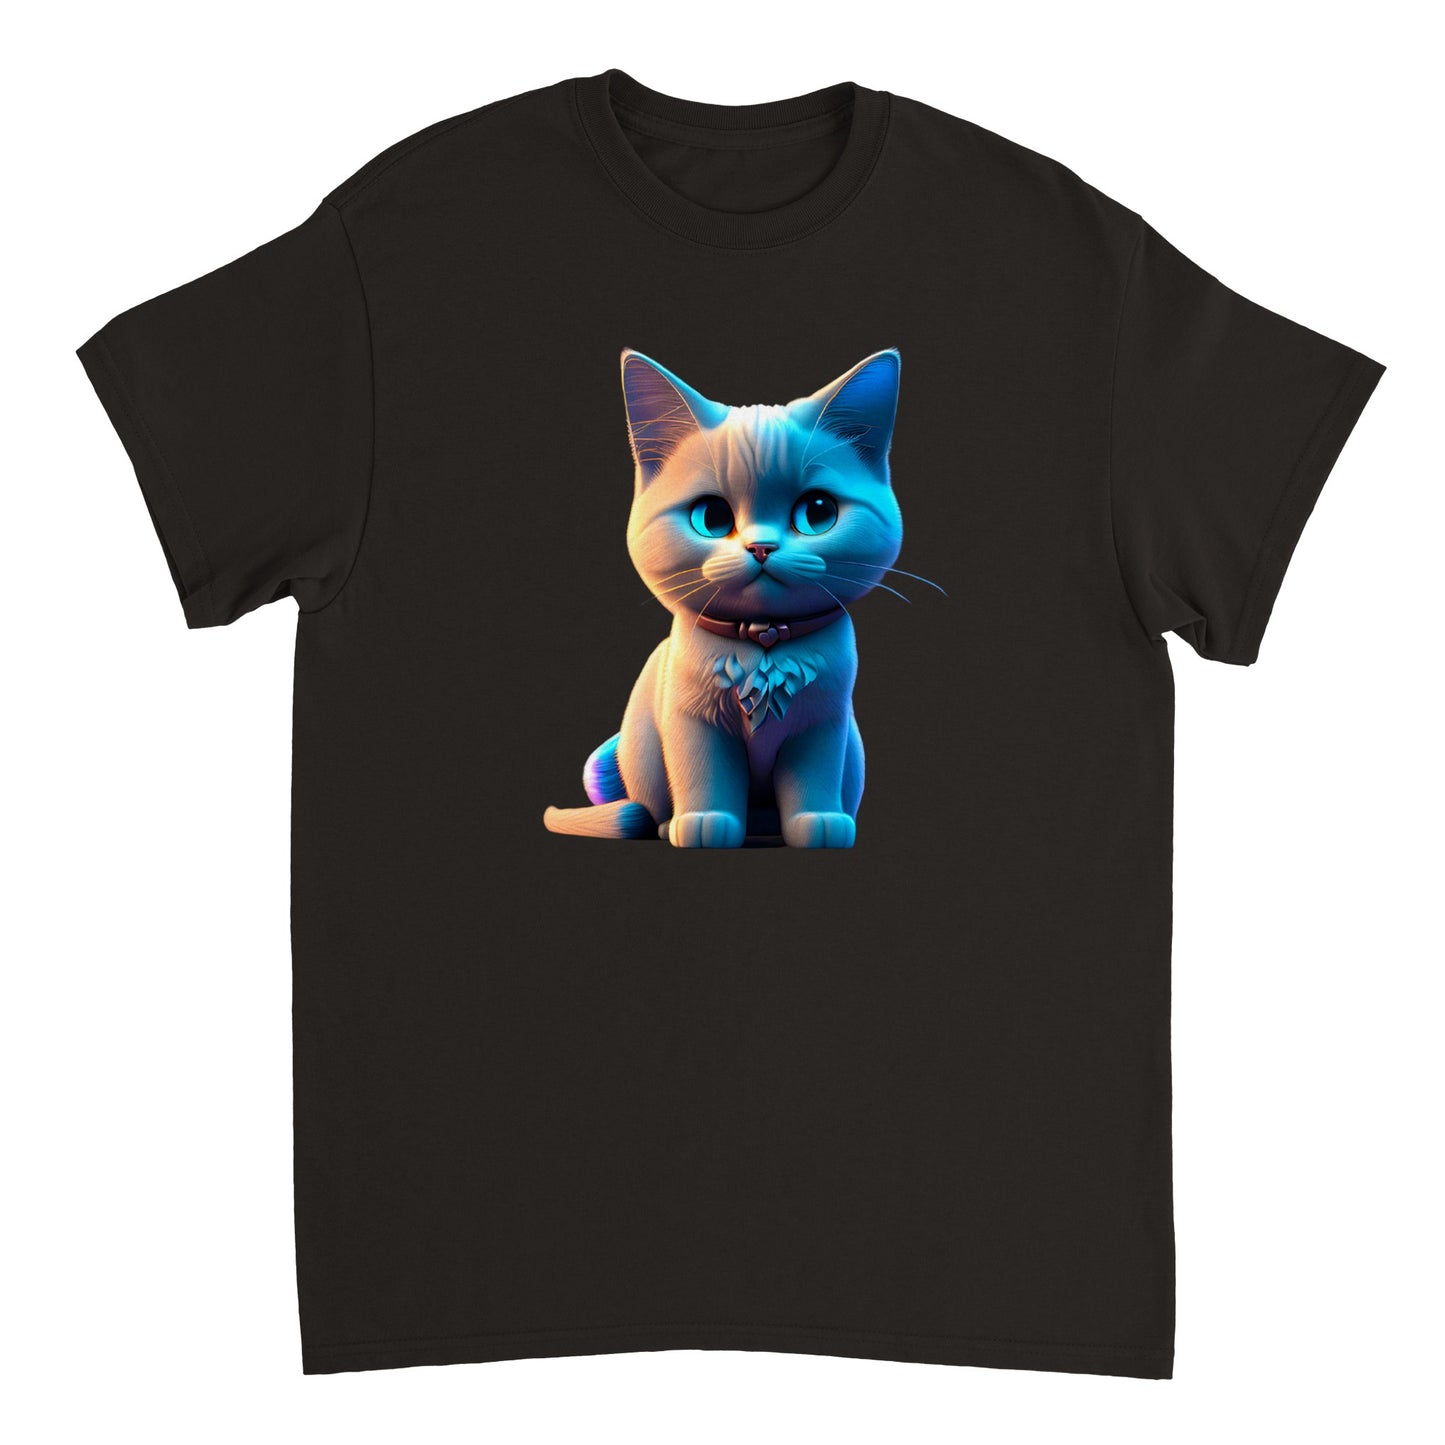 Adorable, Cool, Cute Cats and Kittens Toy - Heavyweight Unisex Crewneck T-shirt 34